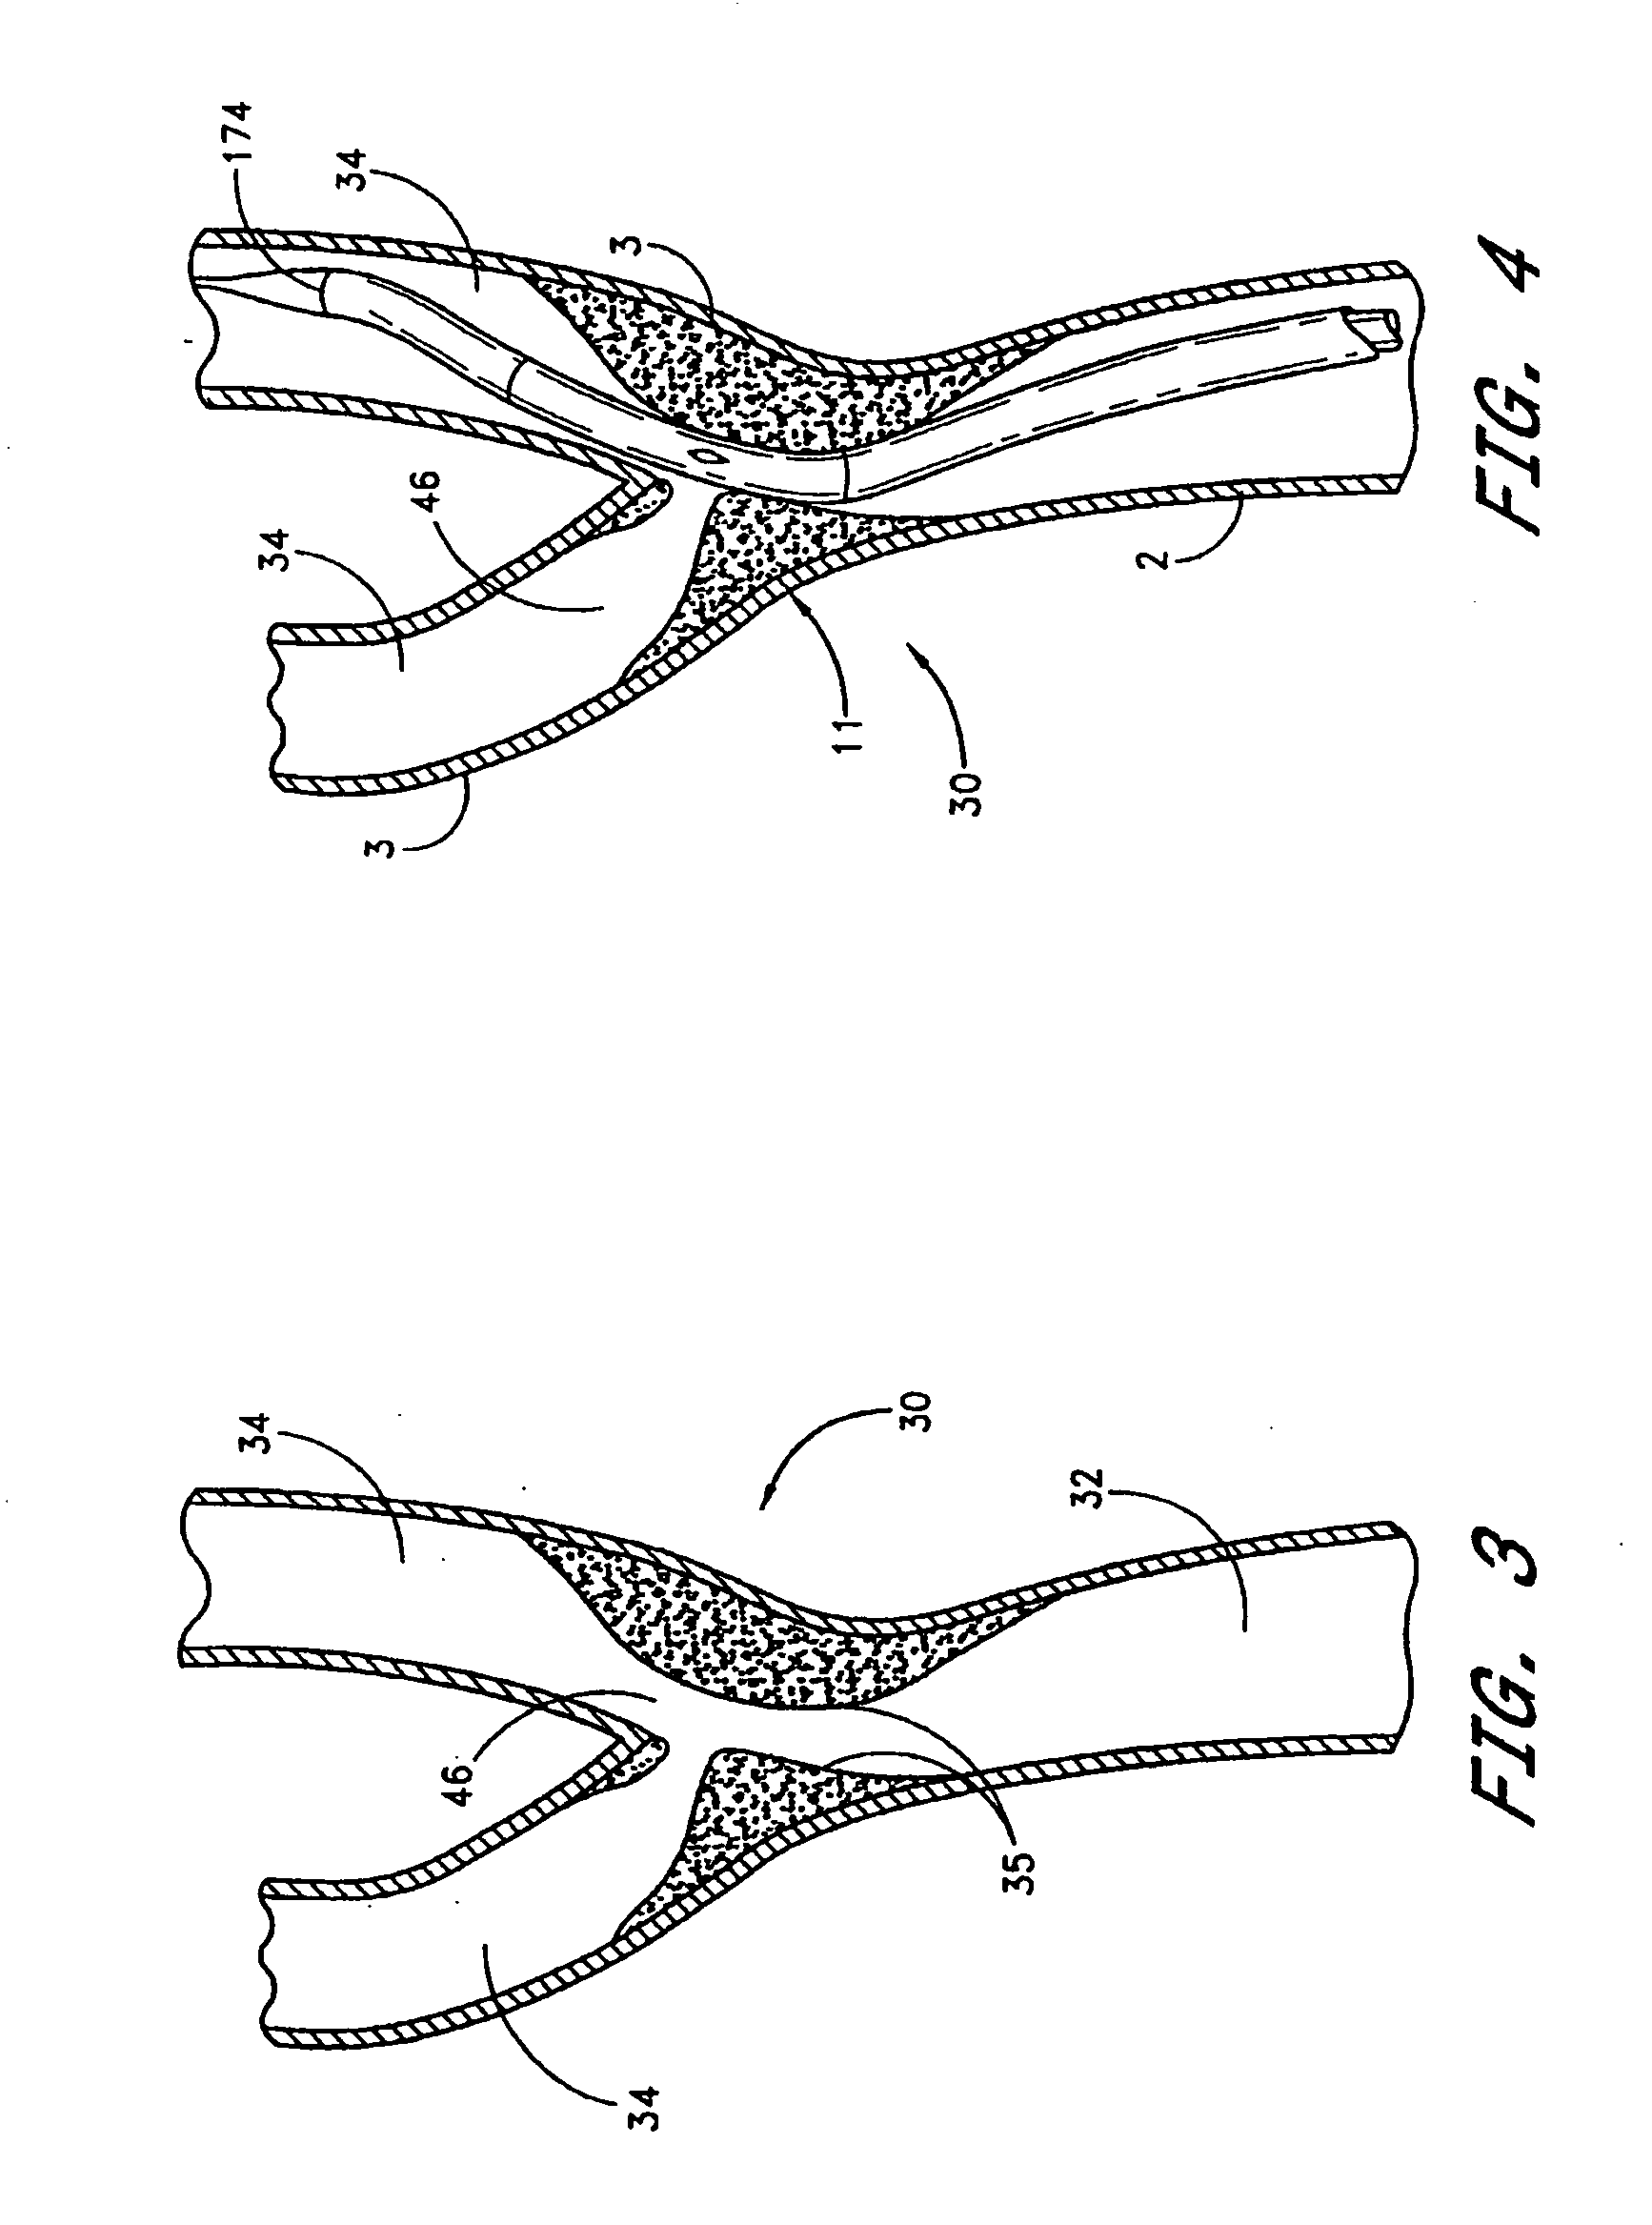 Noncylindrical stent deployment system for treating vascular bifurcations